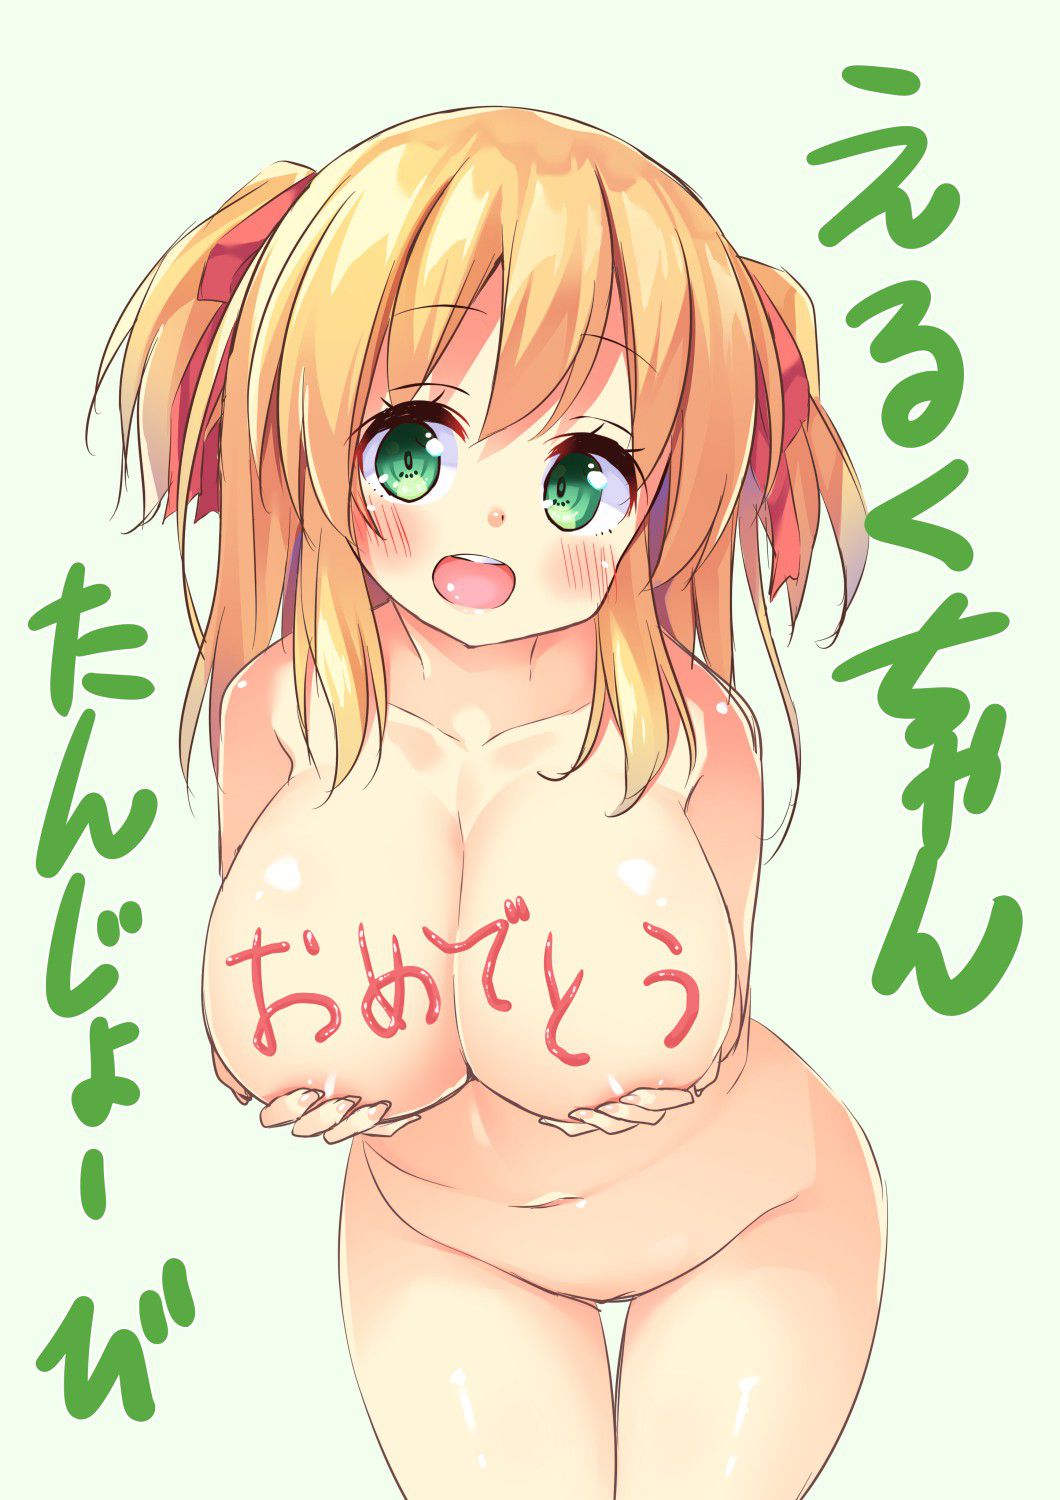 [Female pig] secondary erotic image of the meat urinal-chan that is obscene graffiti in the body wwww Part 4 15